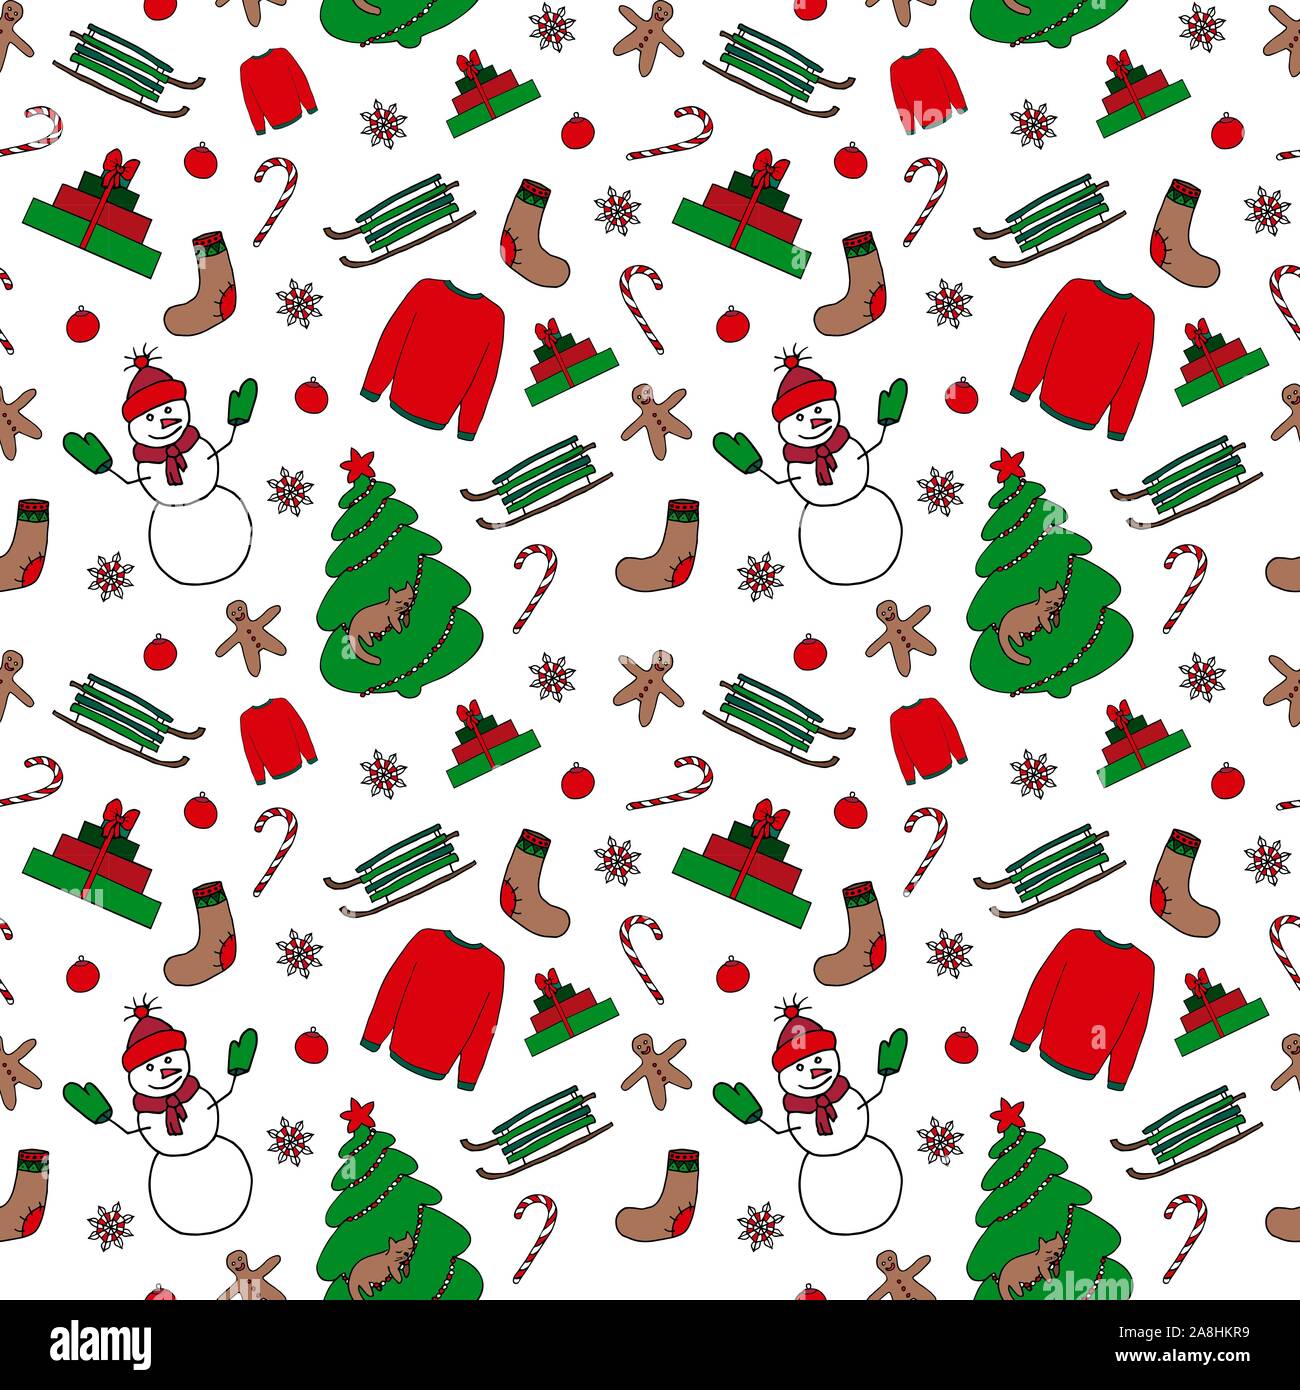 Winter Christmas Seamless Pattern Hand Drawing Sketches On White Background Picture Can Be Used In Christmas And New Year Greeting Cards Posters Flyers Banners Logo Etc Vector Illustration Eps10 Stock Vector Image